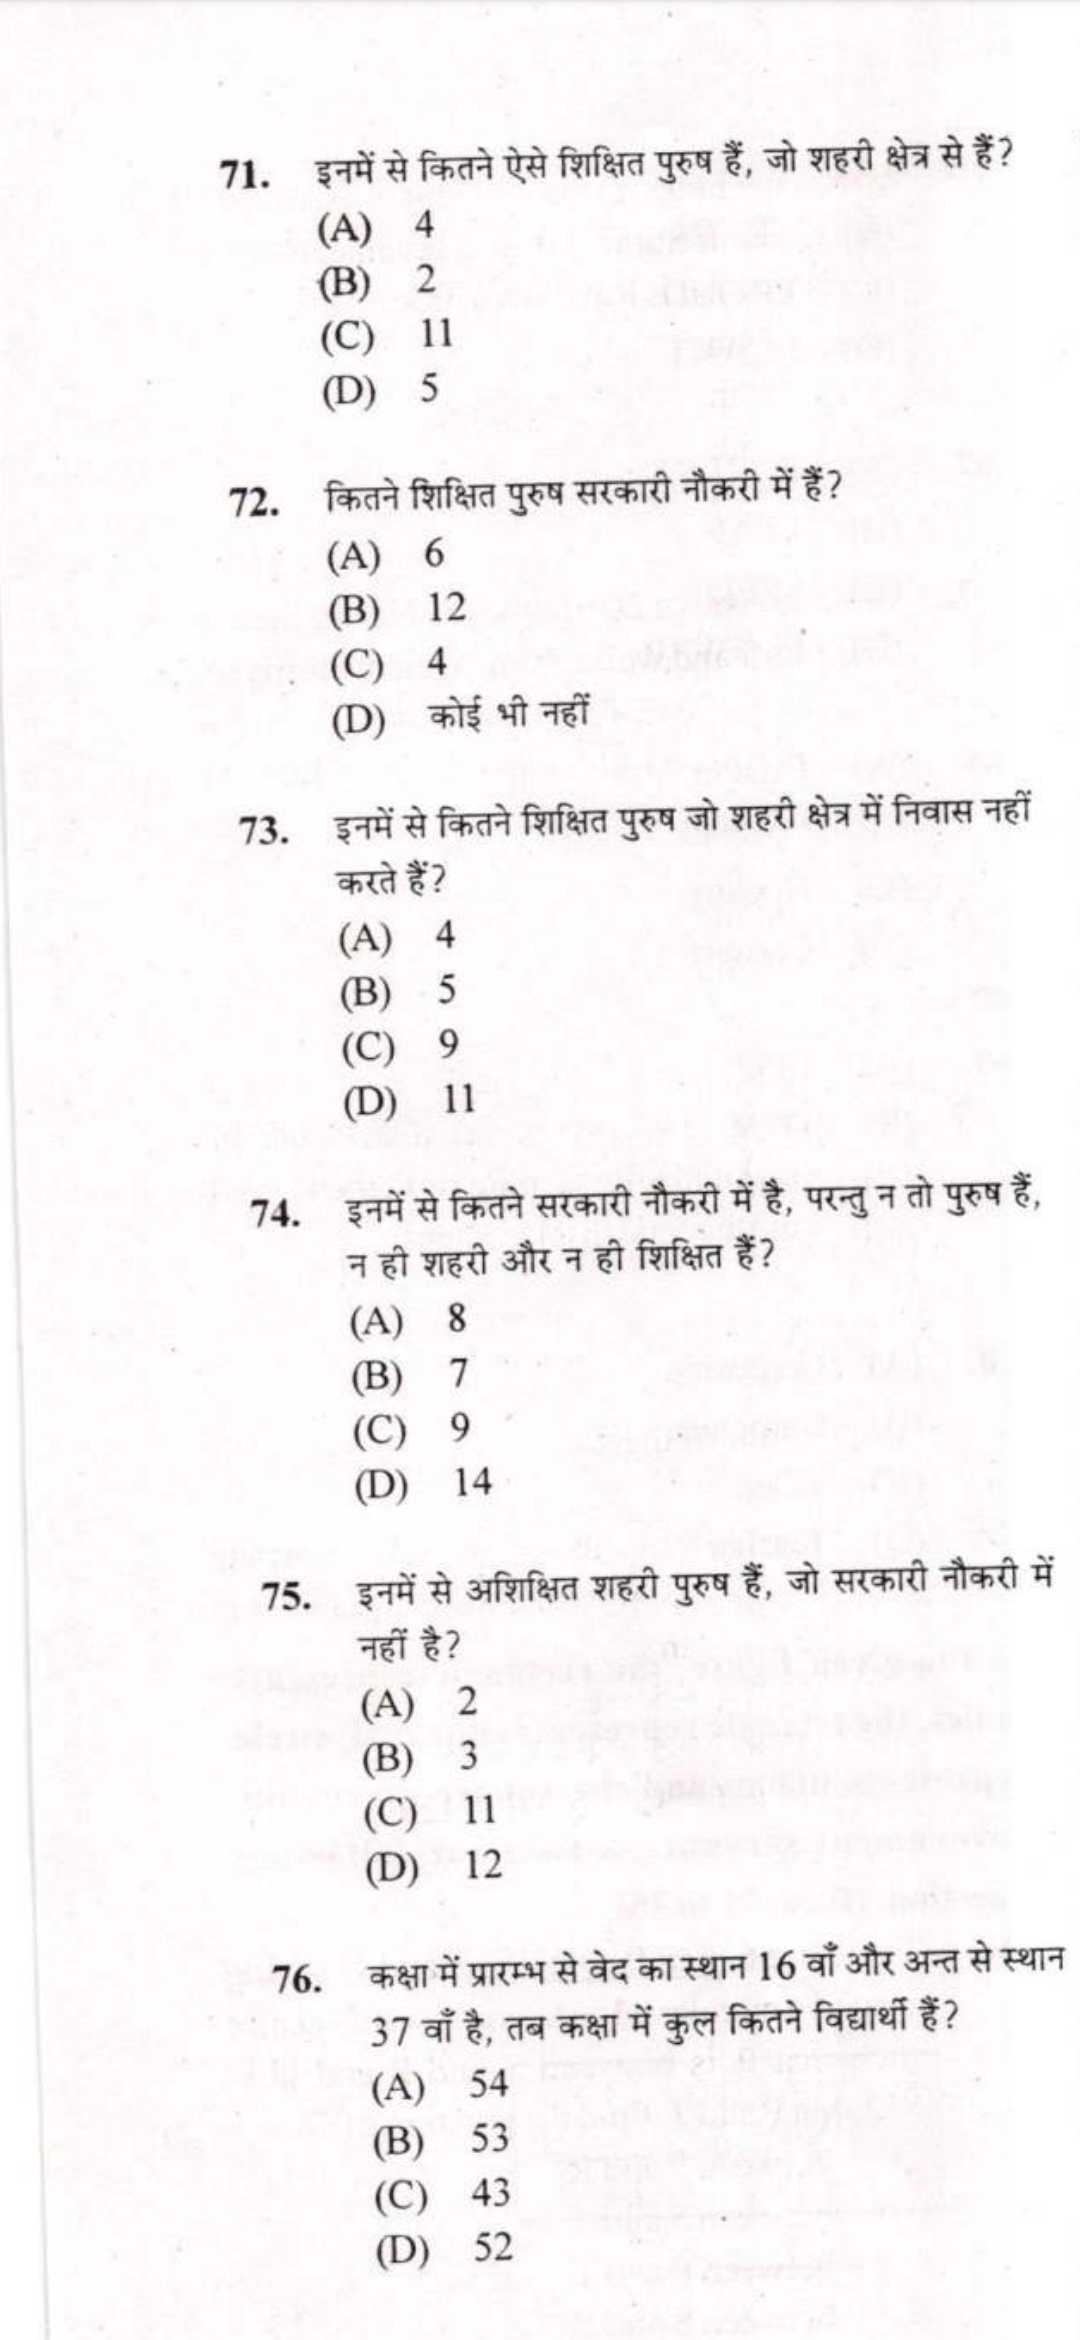 Reasoning questions 71 to 76